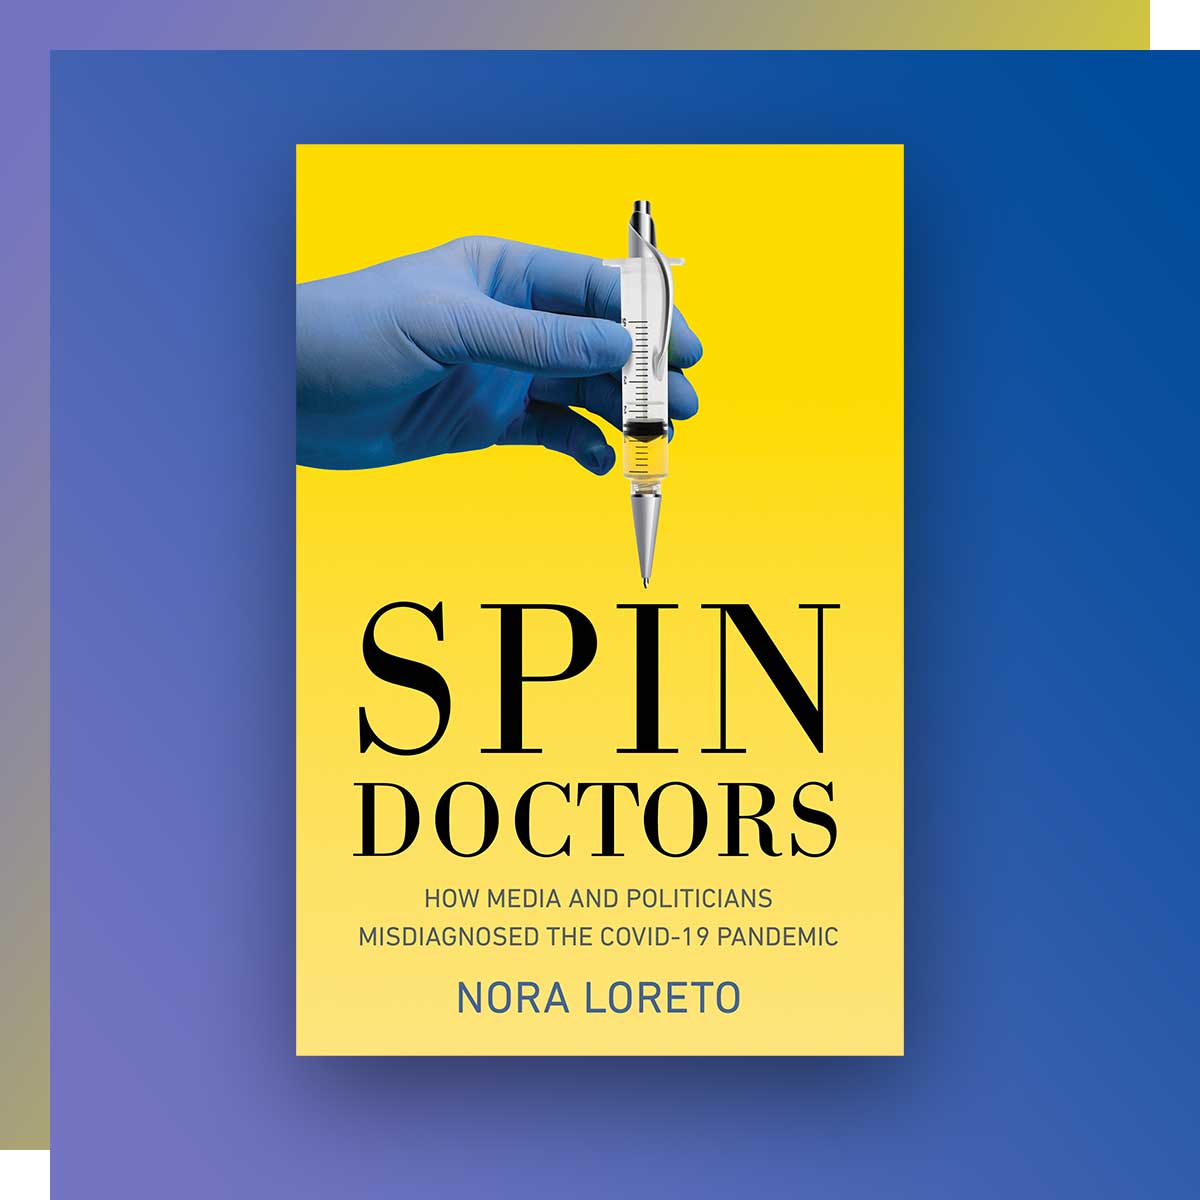 Spin Doctors: How Media and Politicians Misdiagnosed the COVID-19 Pandemic by Nora Loreto, Public Administration & Governance '10